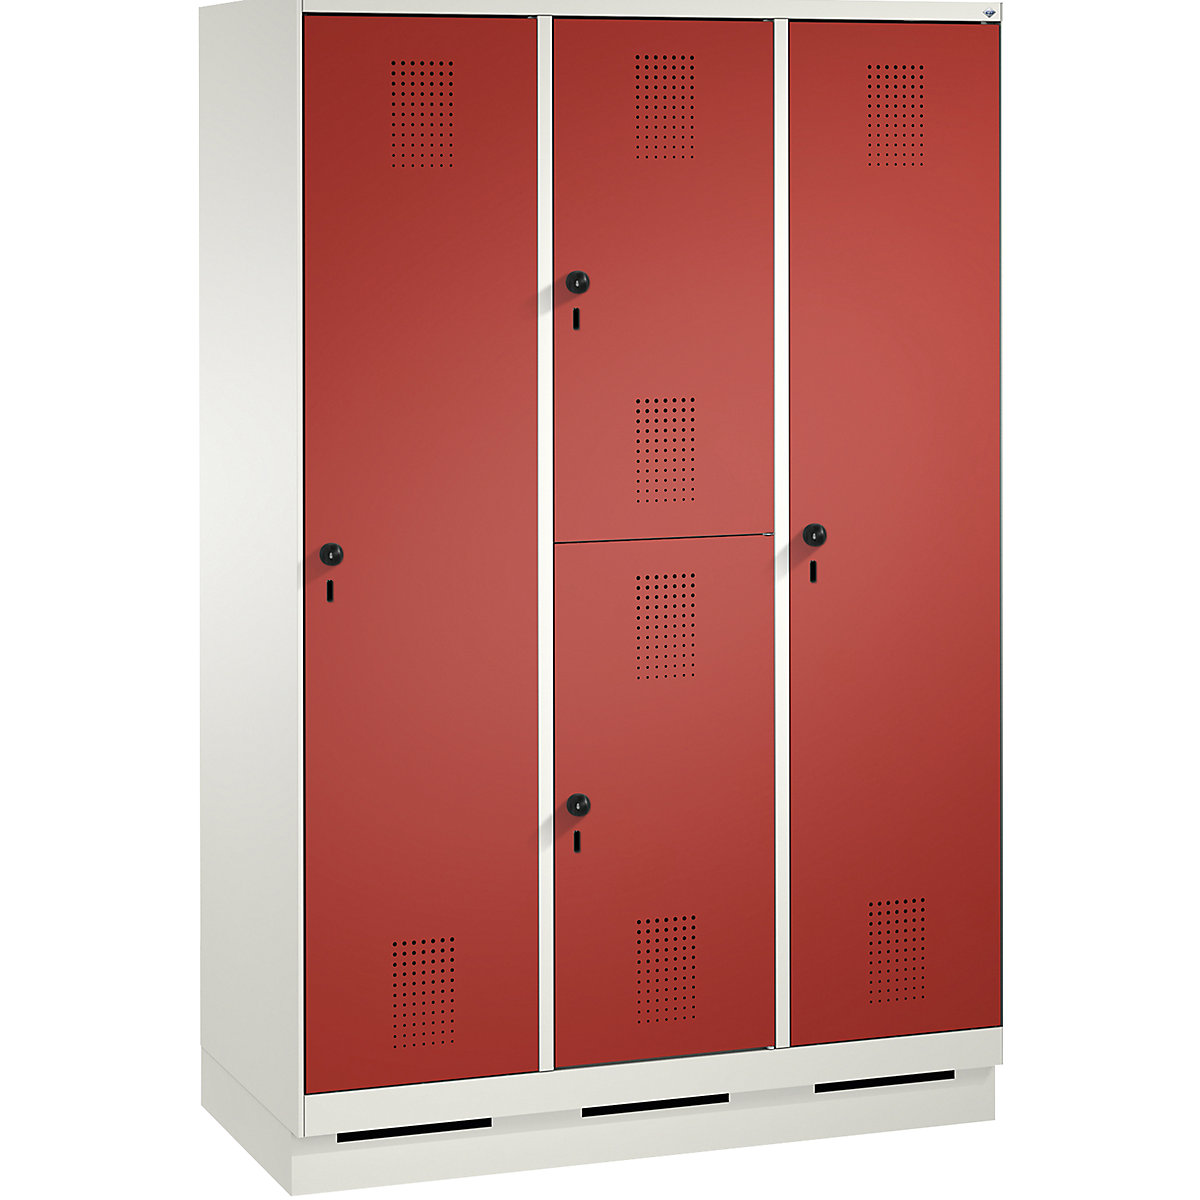 EVOLO combination cupboard, single and double tier – C+P, 3 compartments, 4 doors, compartment width 400 mm, with plinth, traffic white / flame red-11